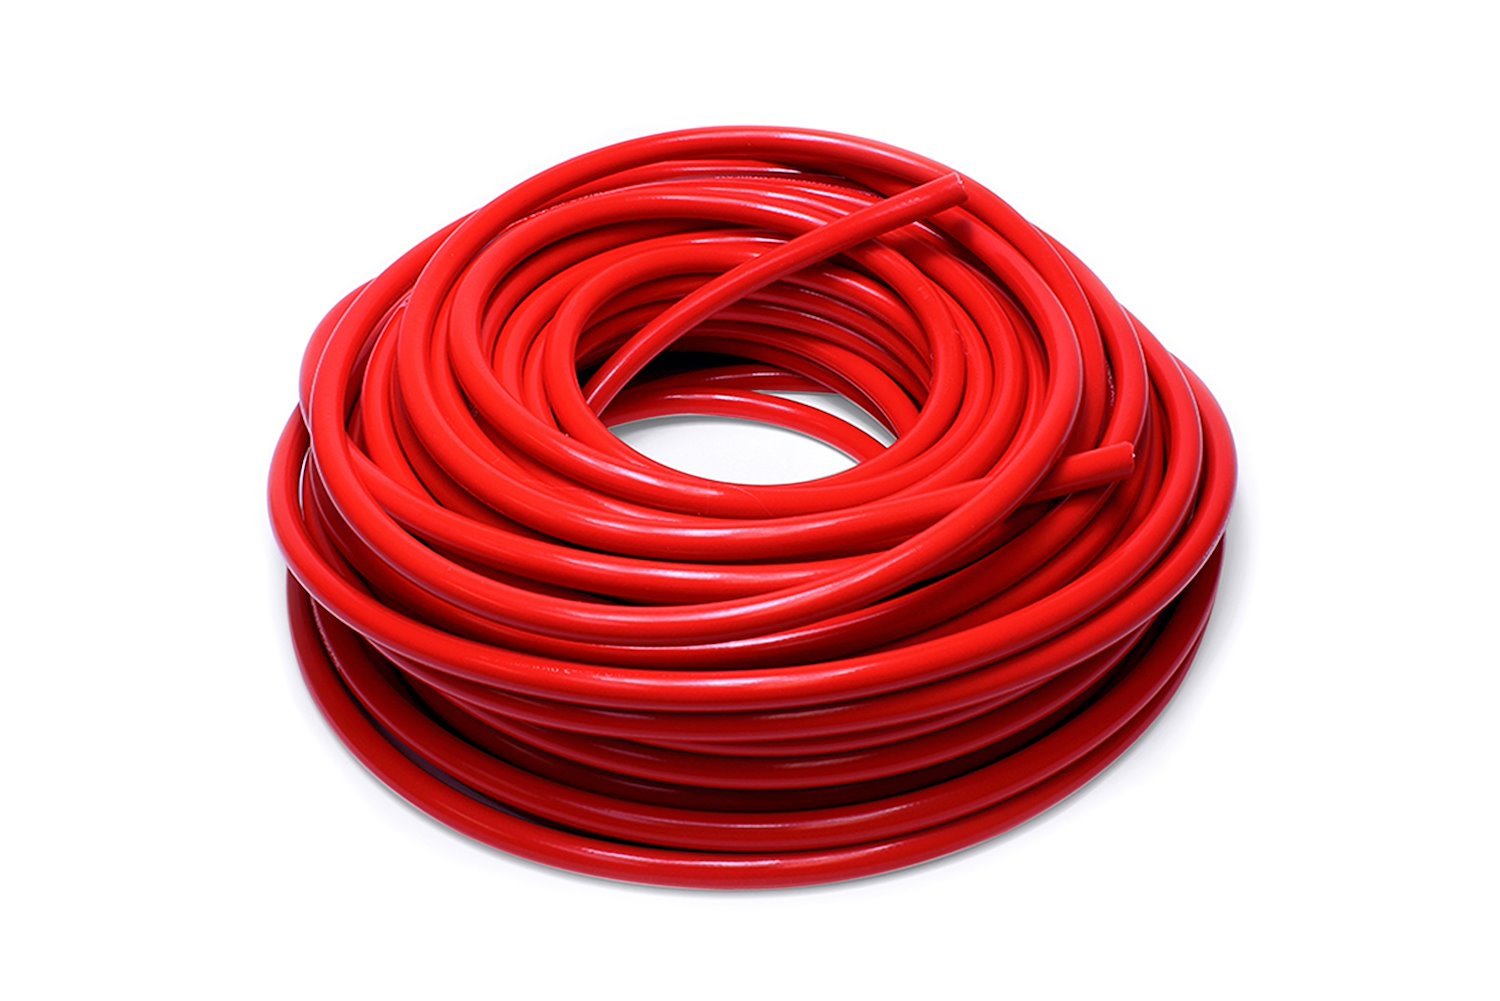 HTHH-050-REDx50 Silicone Heater Hose Tubing, High-Temp 1-Ply Reinforced, 1/2 in. ID, 50 ft. Roll, Red